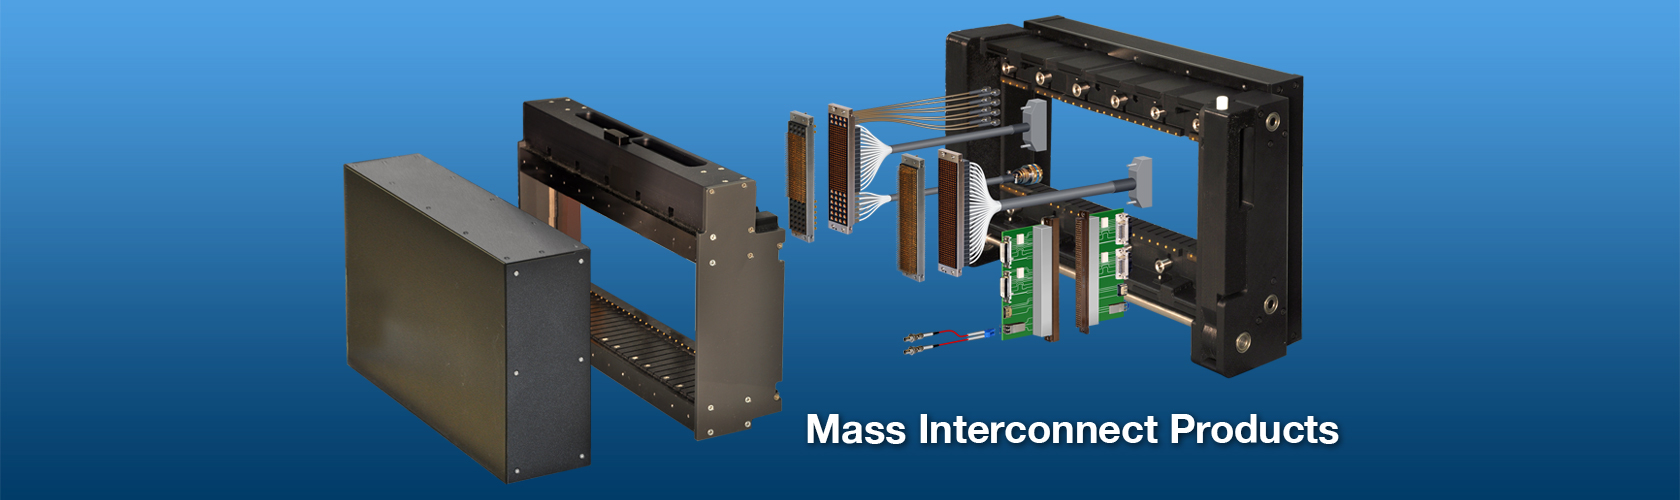 Mass Interconnect Products